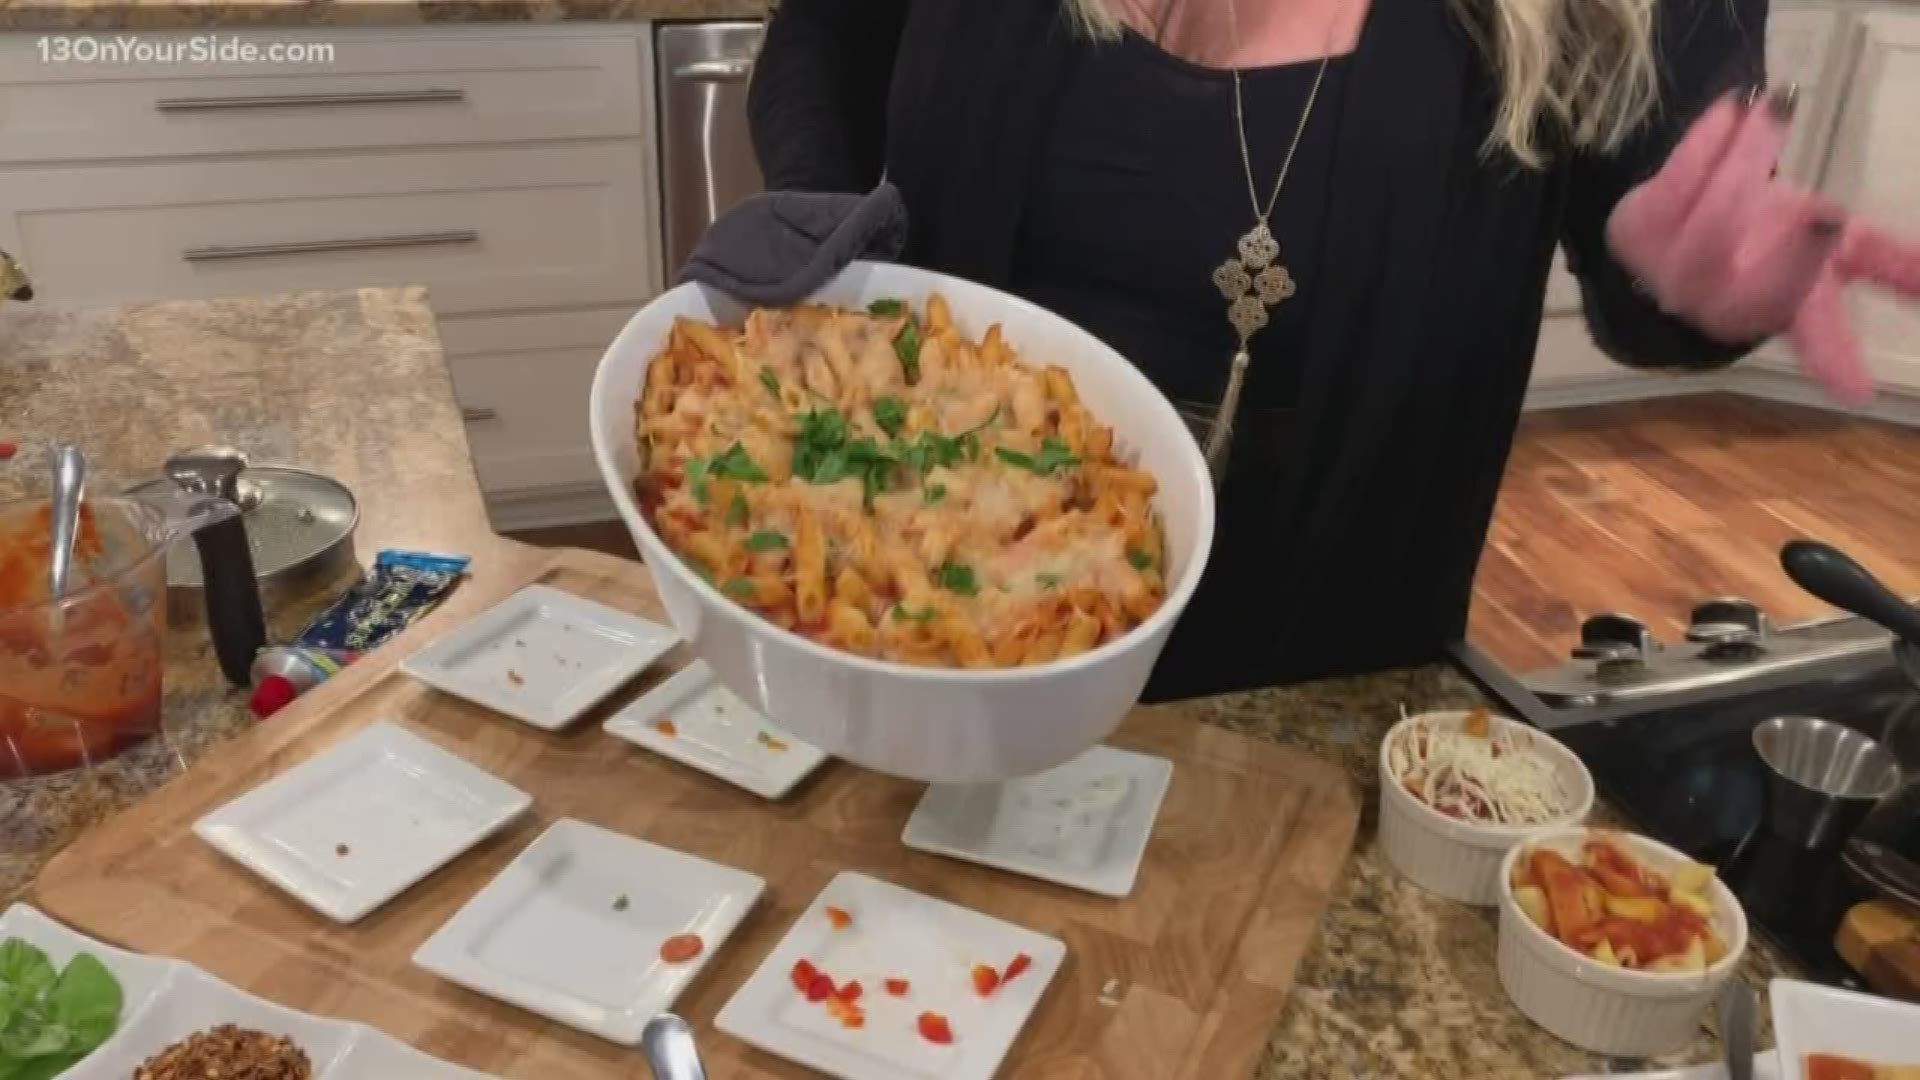 Stuck on what to make for dinner? Gina Ferwerda shares a new recipe perfect for the whole family while you're social distancing.